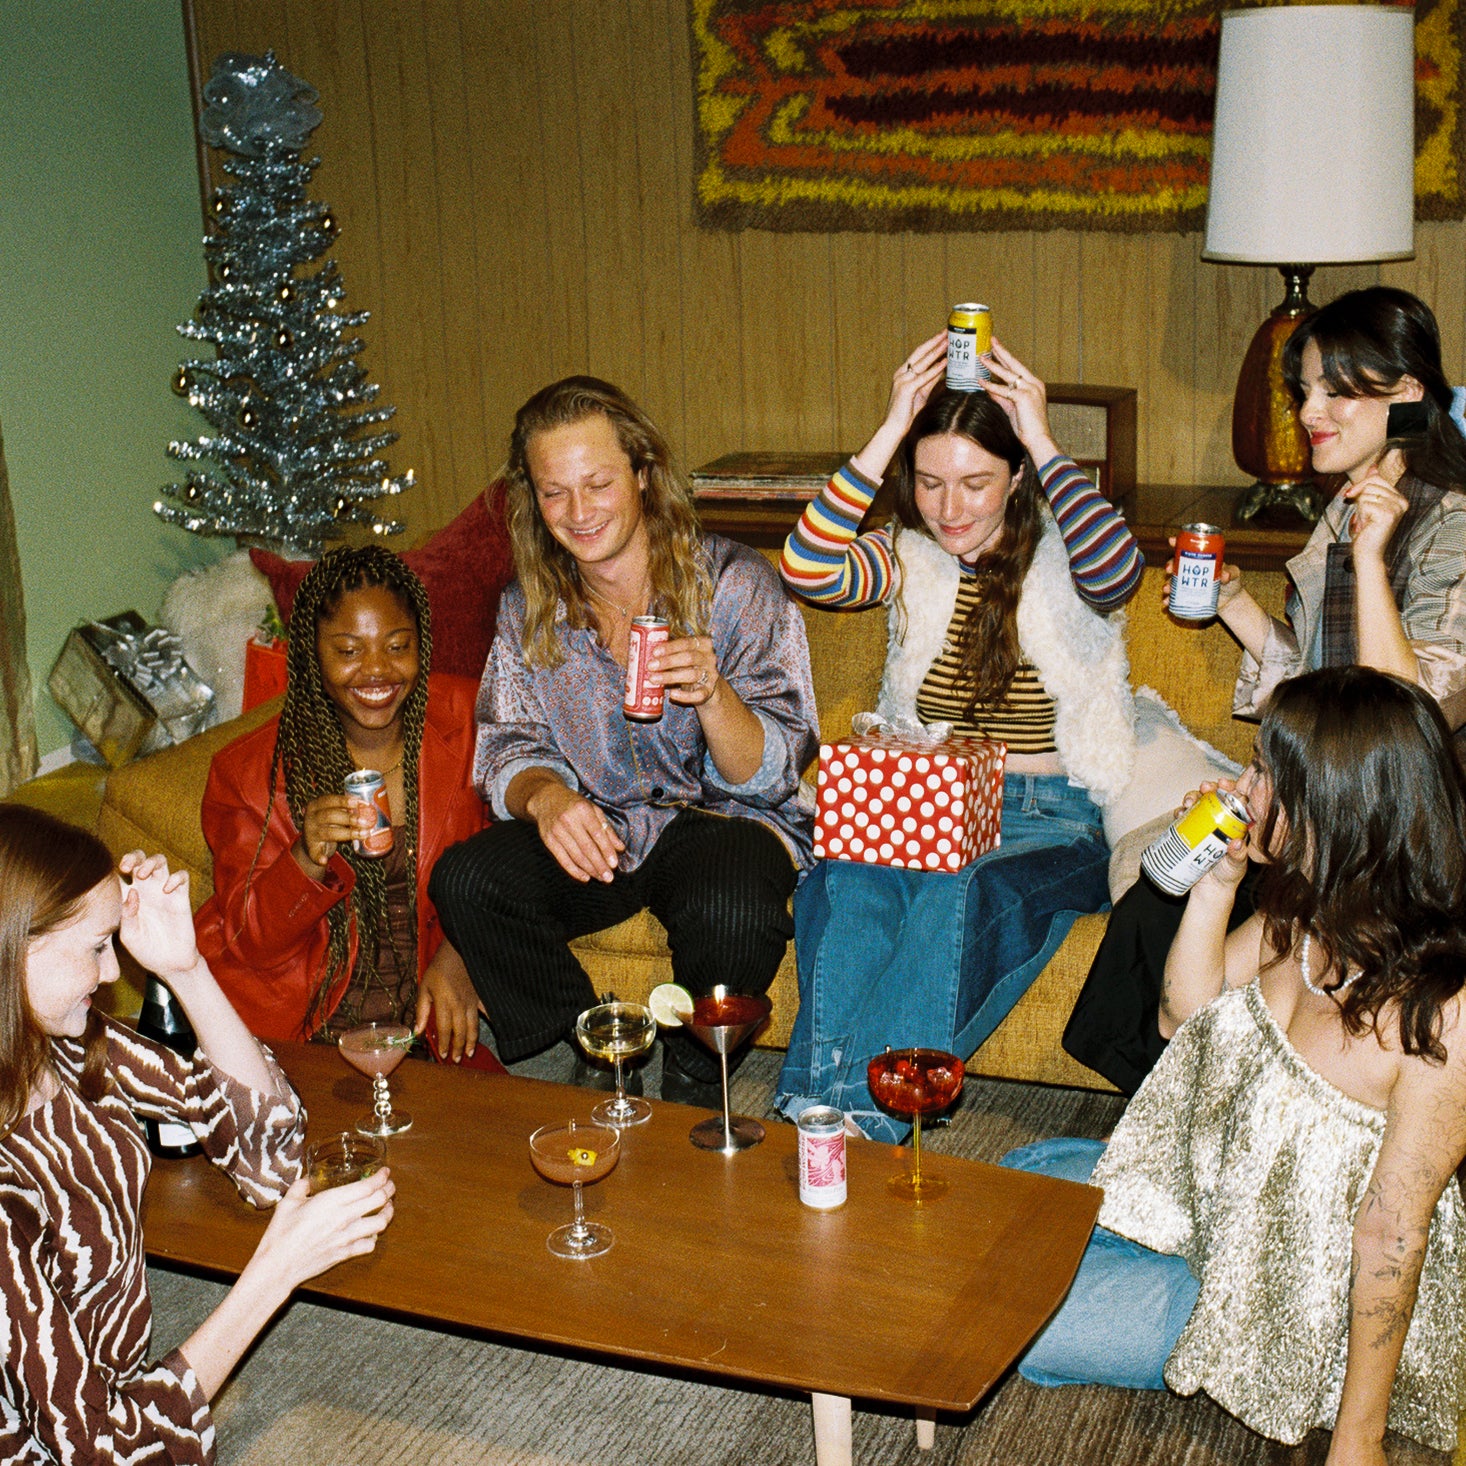 5 Hosting Tips From People Who Throw a Lot of Parties